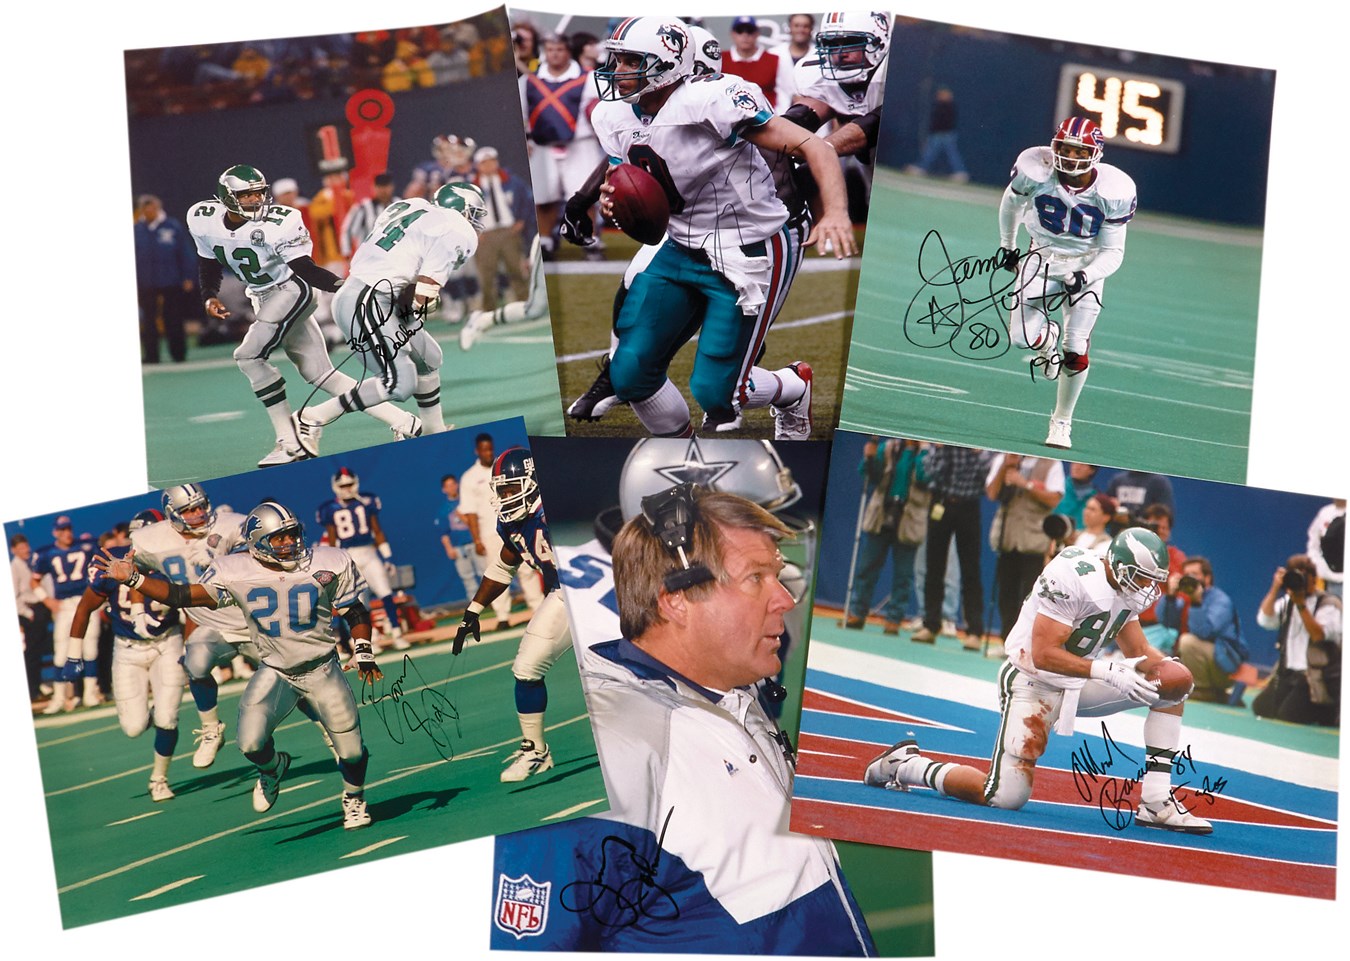 - 1980s-90s "Superstars of the NFL" 16x20” In Person Signed Photographs from VIP Photographer Richard Brightly (6)